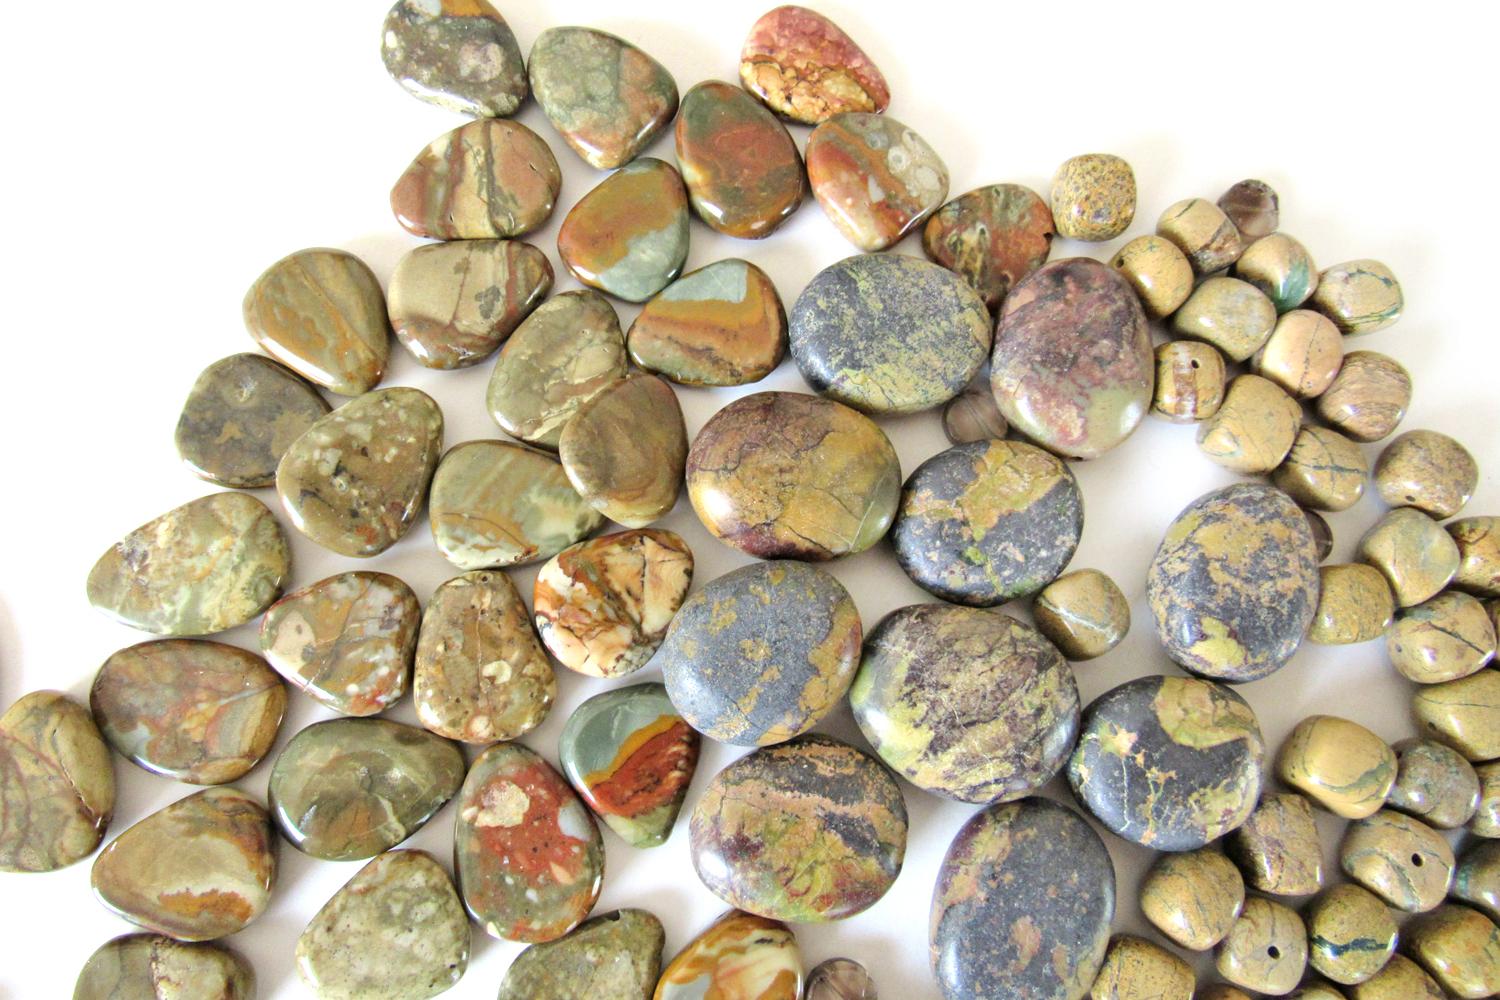 Large Bead Lot of Various Jasper and Smoky Quartz Stones for Jewelry Making in Earth Tone Colors - Craft Beading Supplies